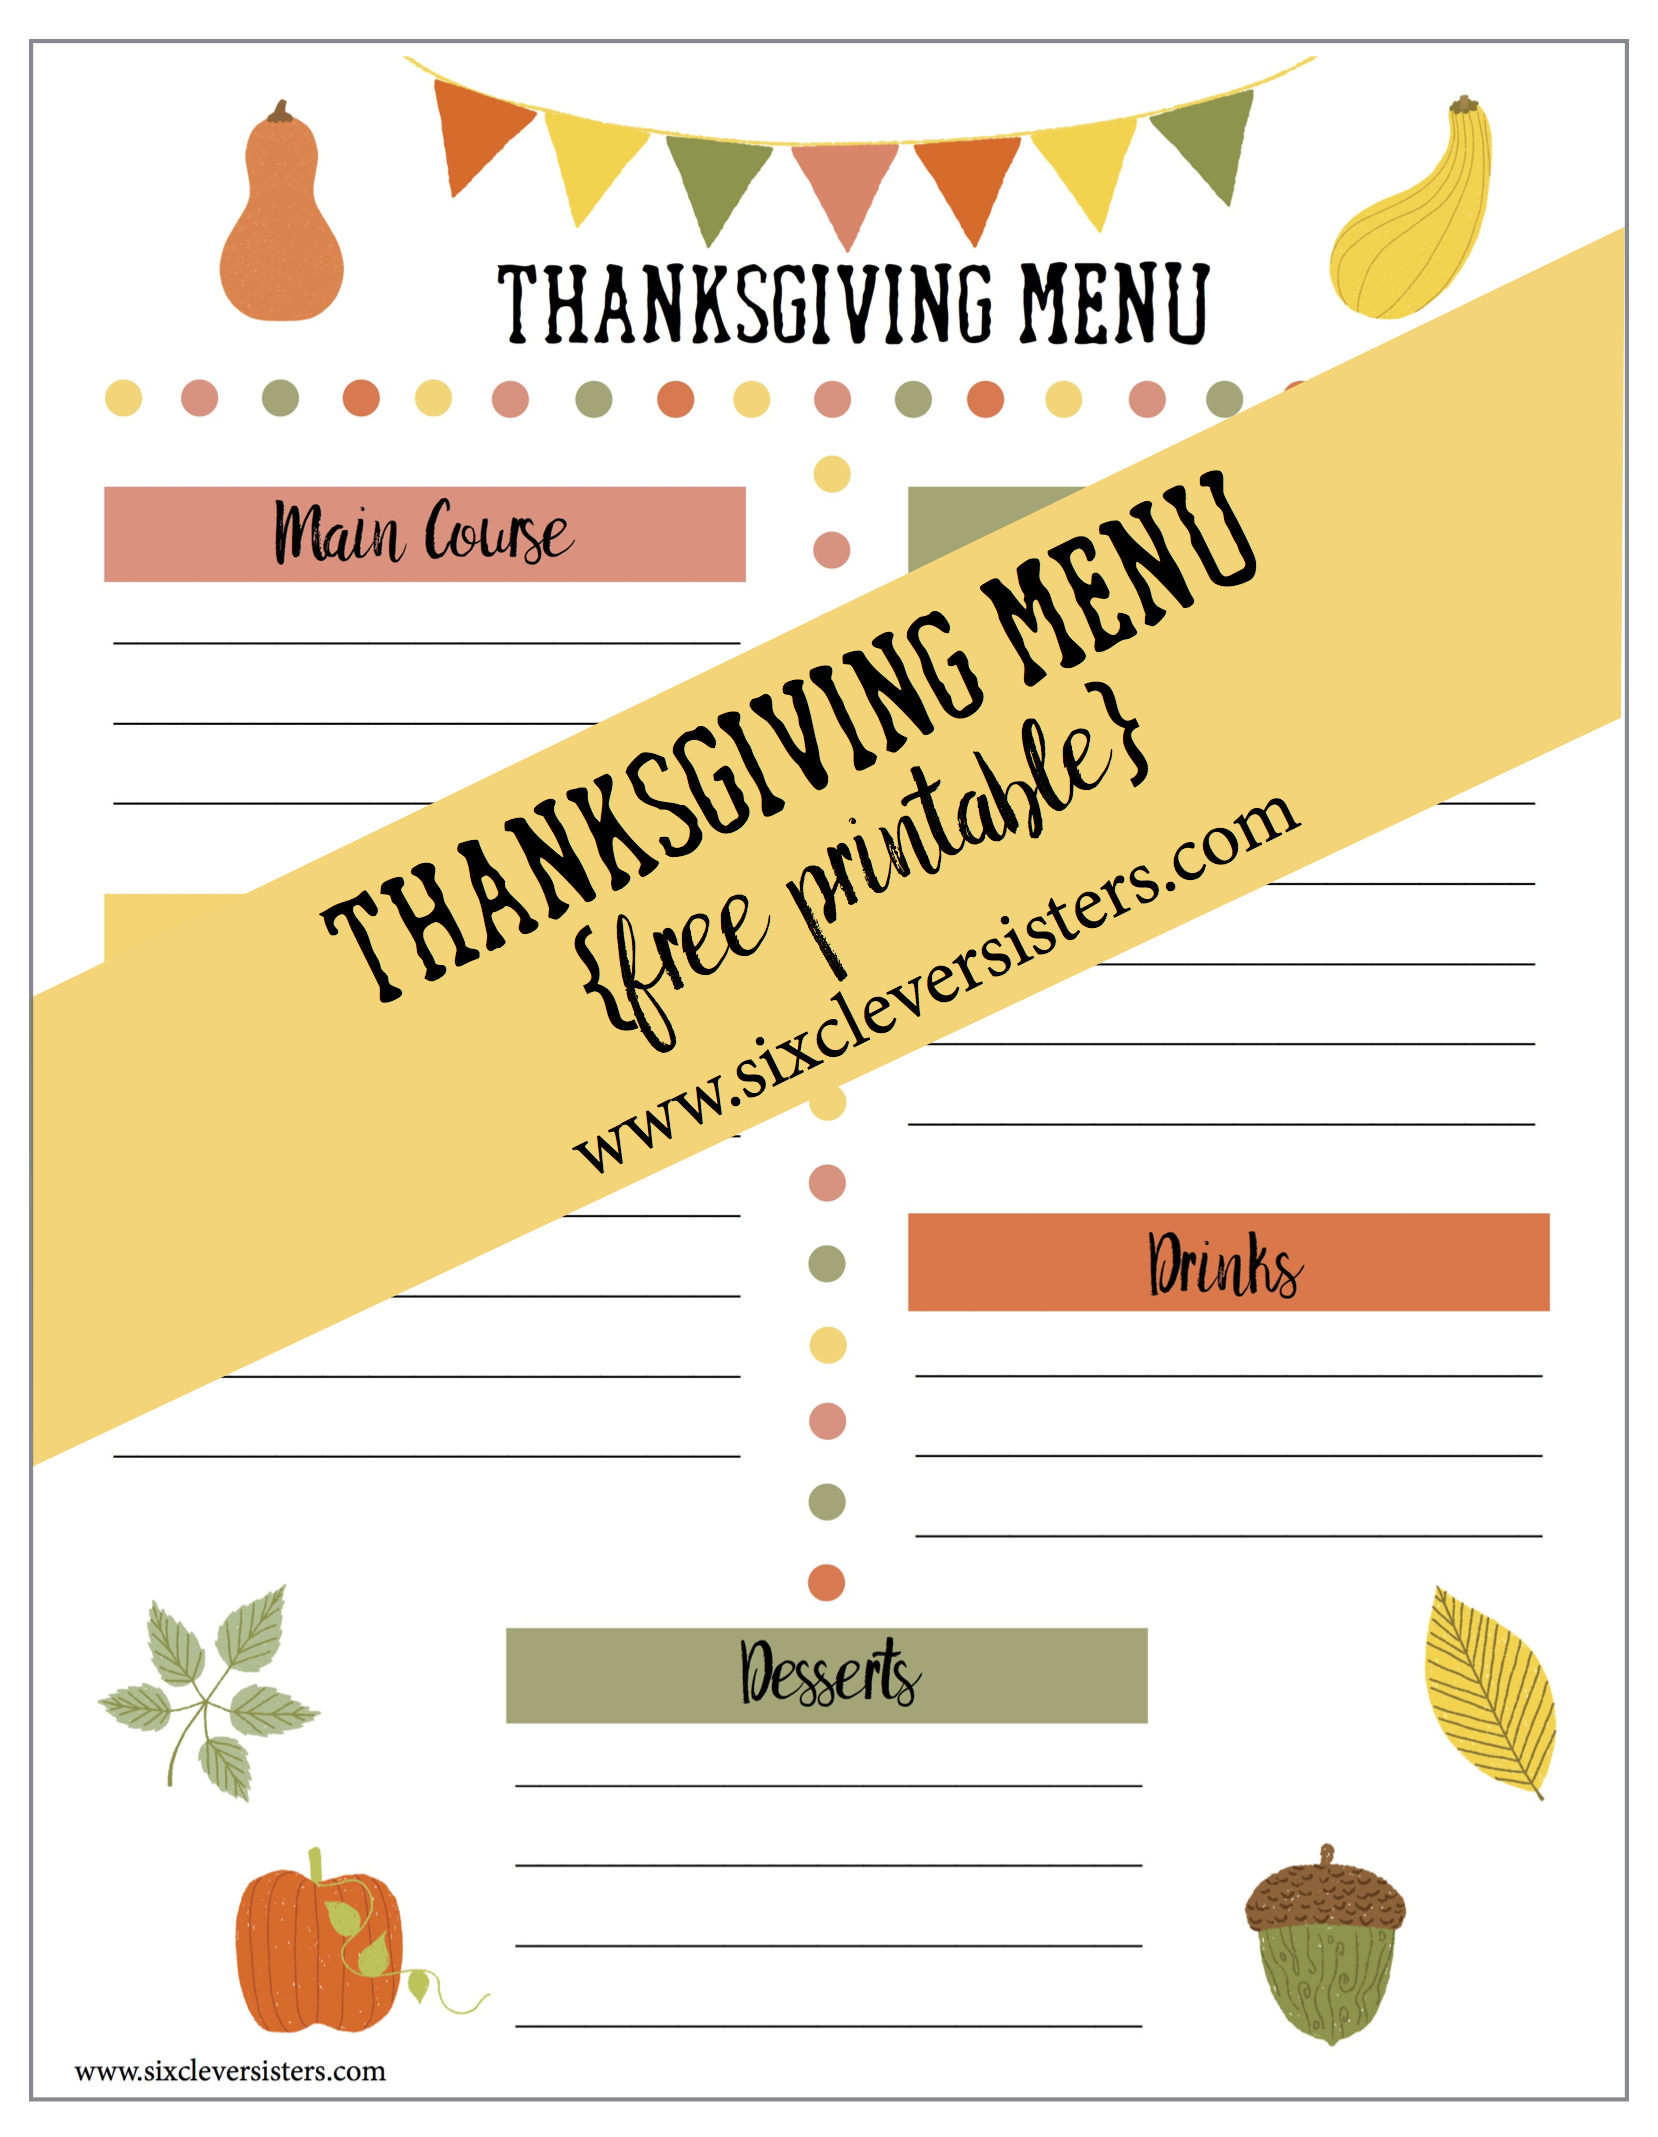 Printable Thanksgiving Menu and Shopping List - Six Clever Sisters